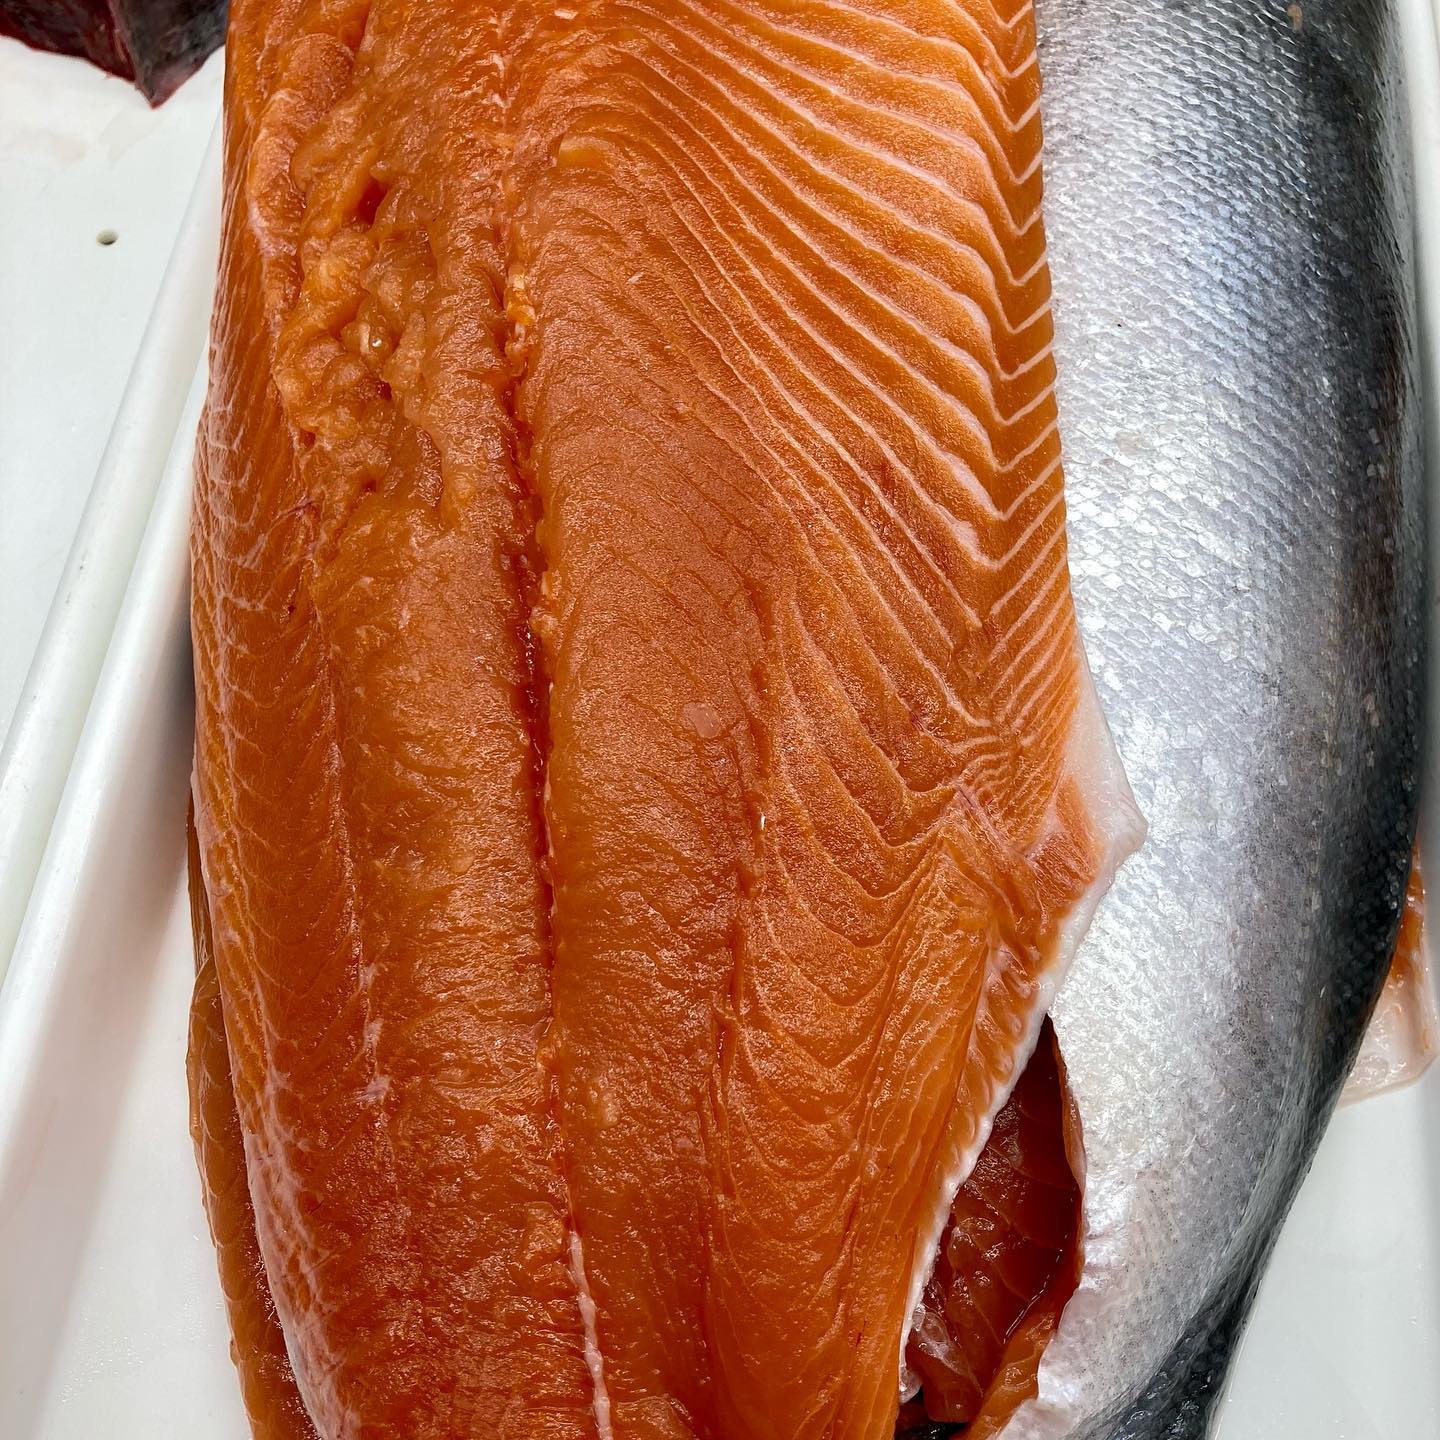 Best prices of the season on Summertime Favorites happening now! Just in:
Wild King Salmon $24.99lb
Local Bluefish $10.99lb
Local Striped Bass $23.99lb